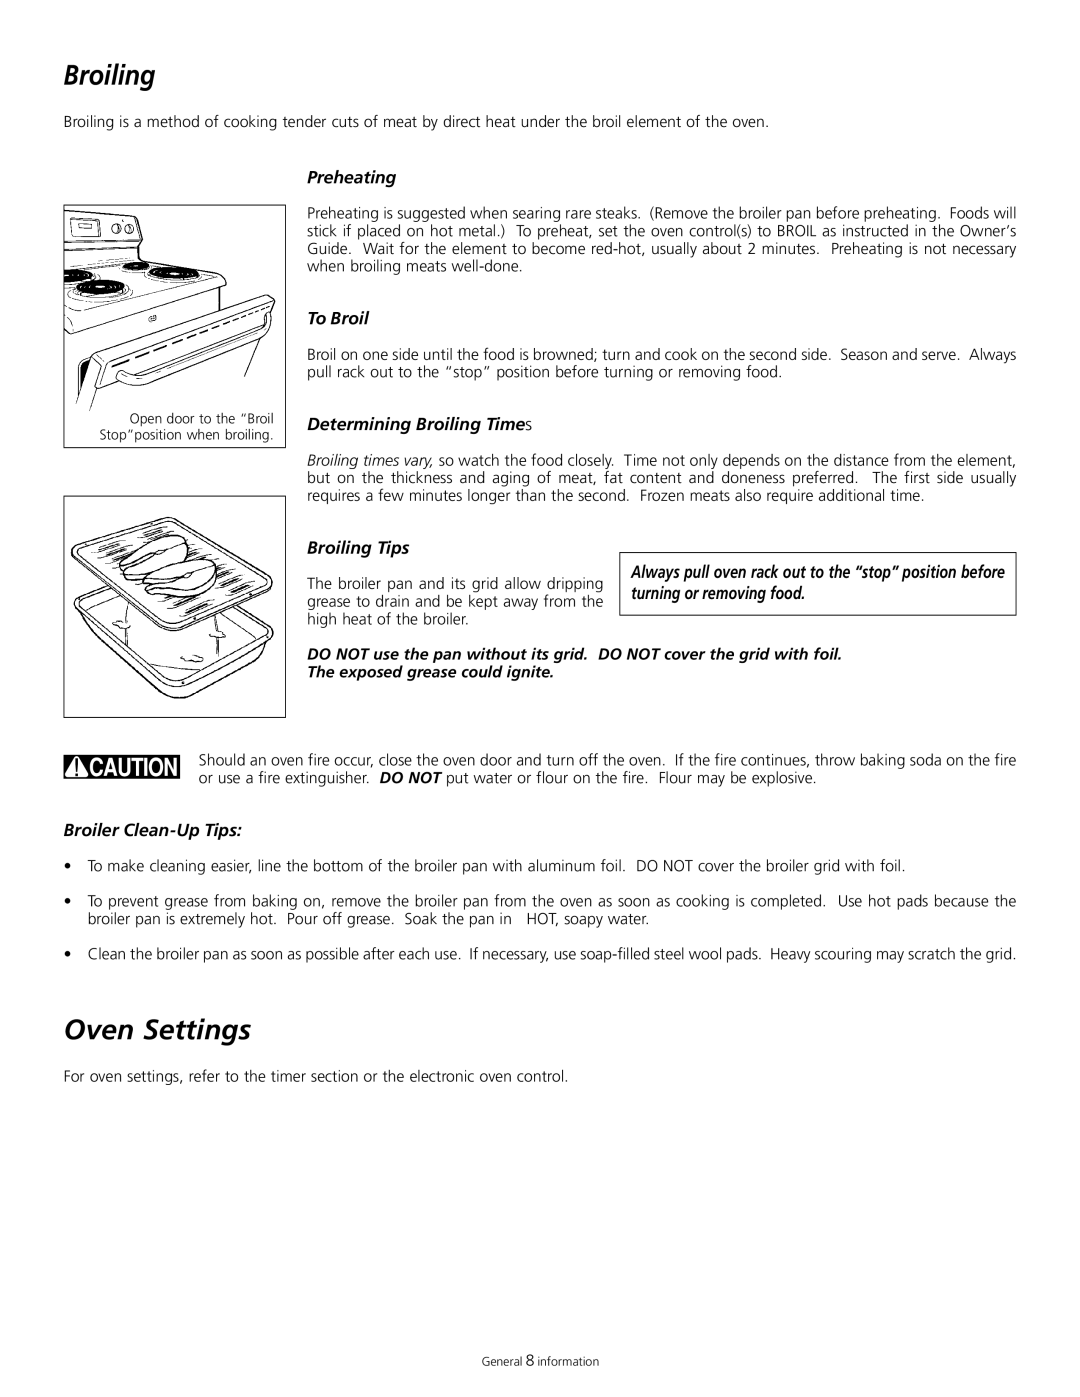 Tappan 318200505 Oven Settings, Preheating, To Broil, Determining Broiling Times, Broiling Tips, Broiler Clean-UpTips 